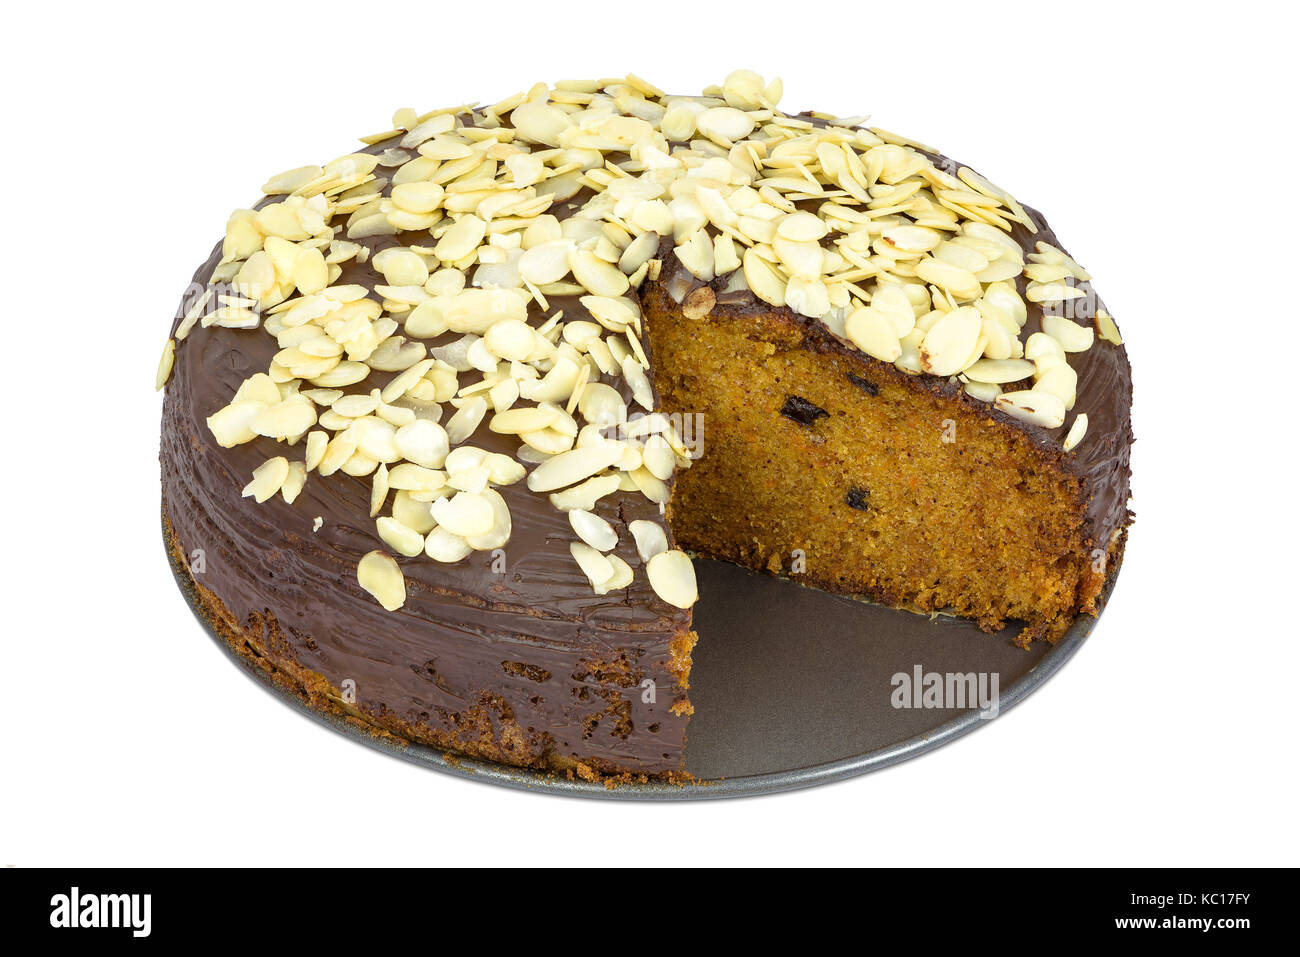 Carrot cake with almond flakes isolated on white background with clipping path Stock Photo